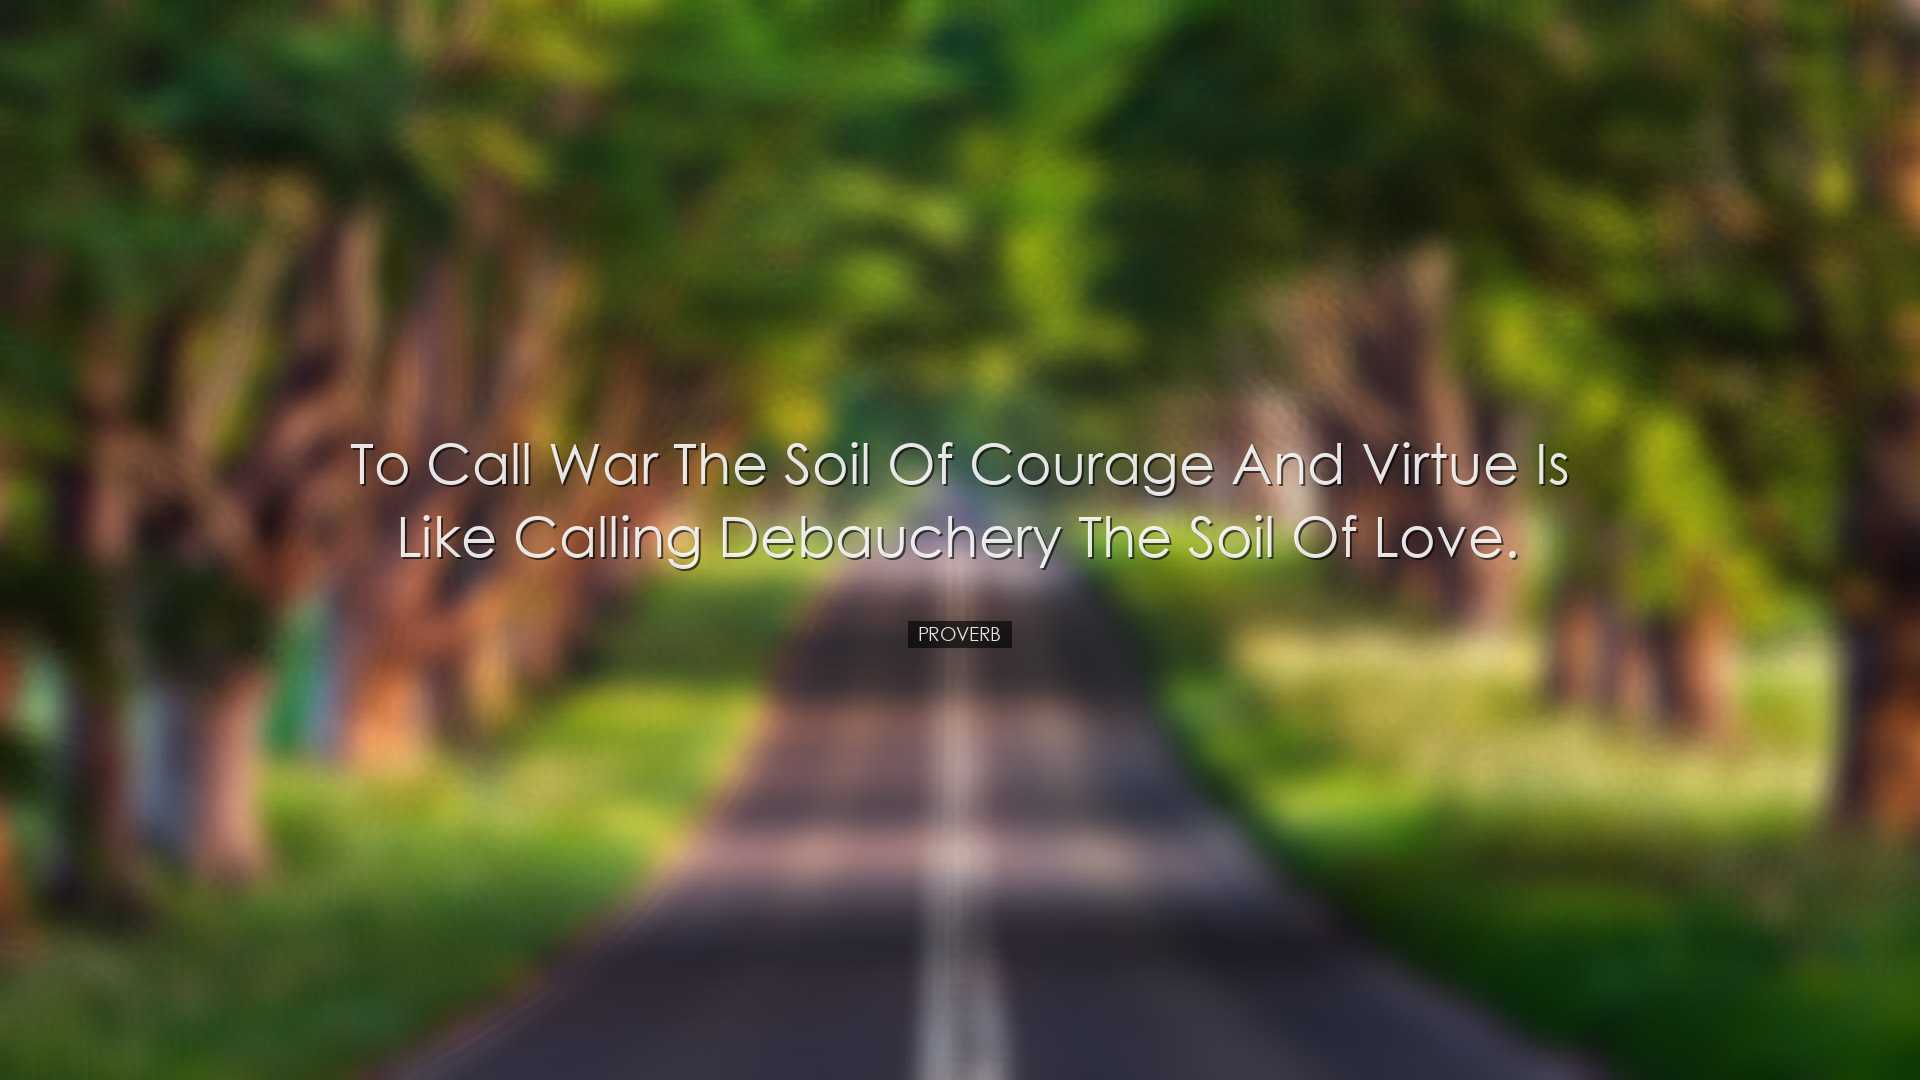 To call war the soil of courage and virtue is like calling debauch